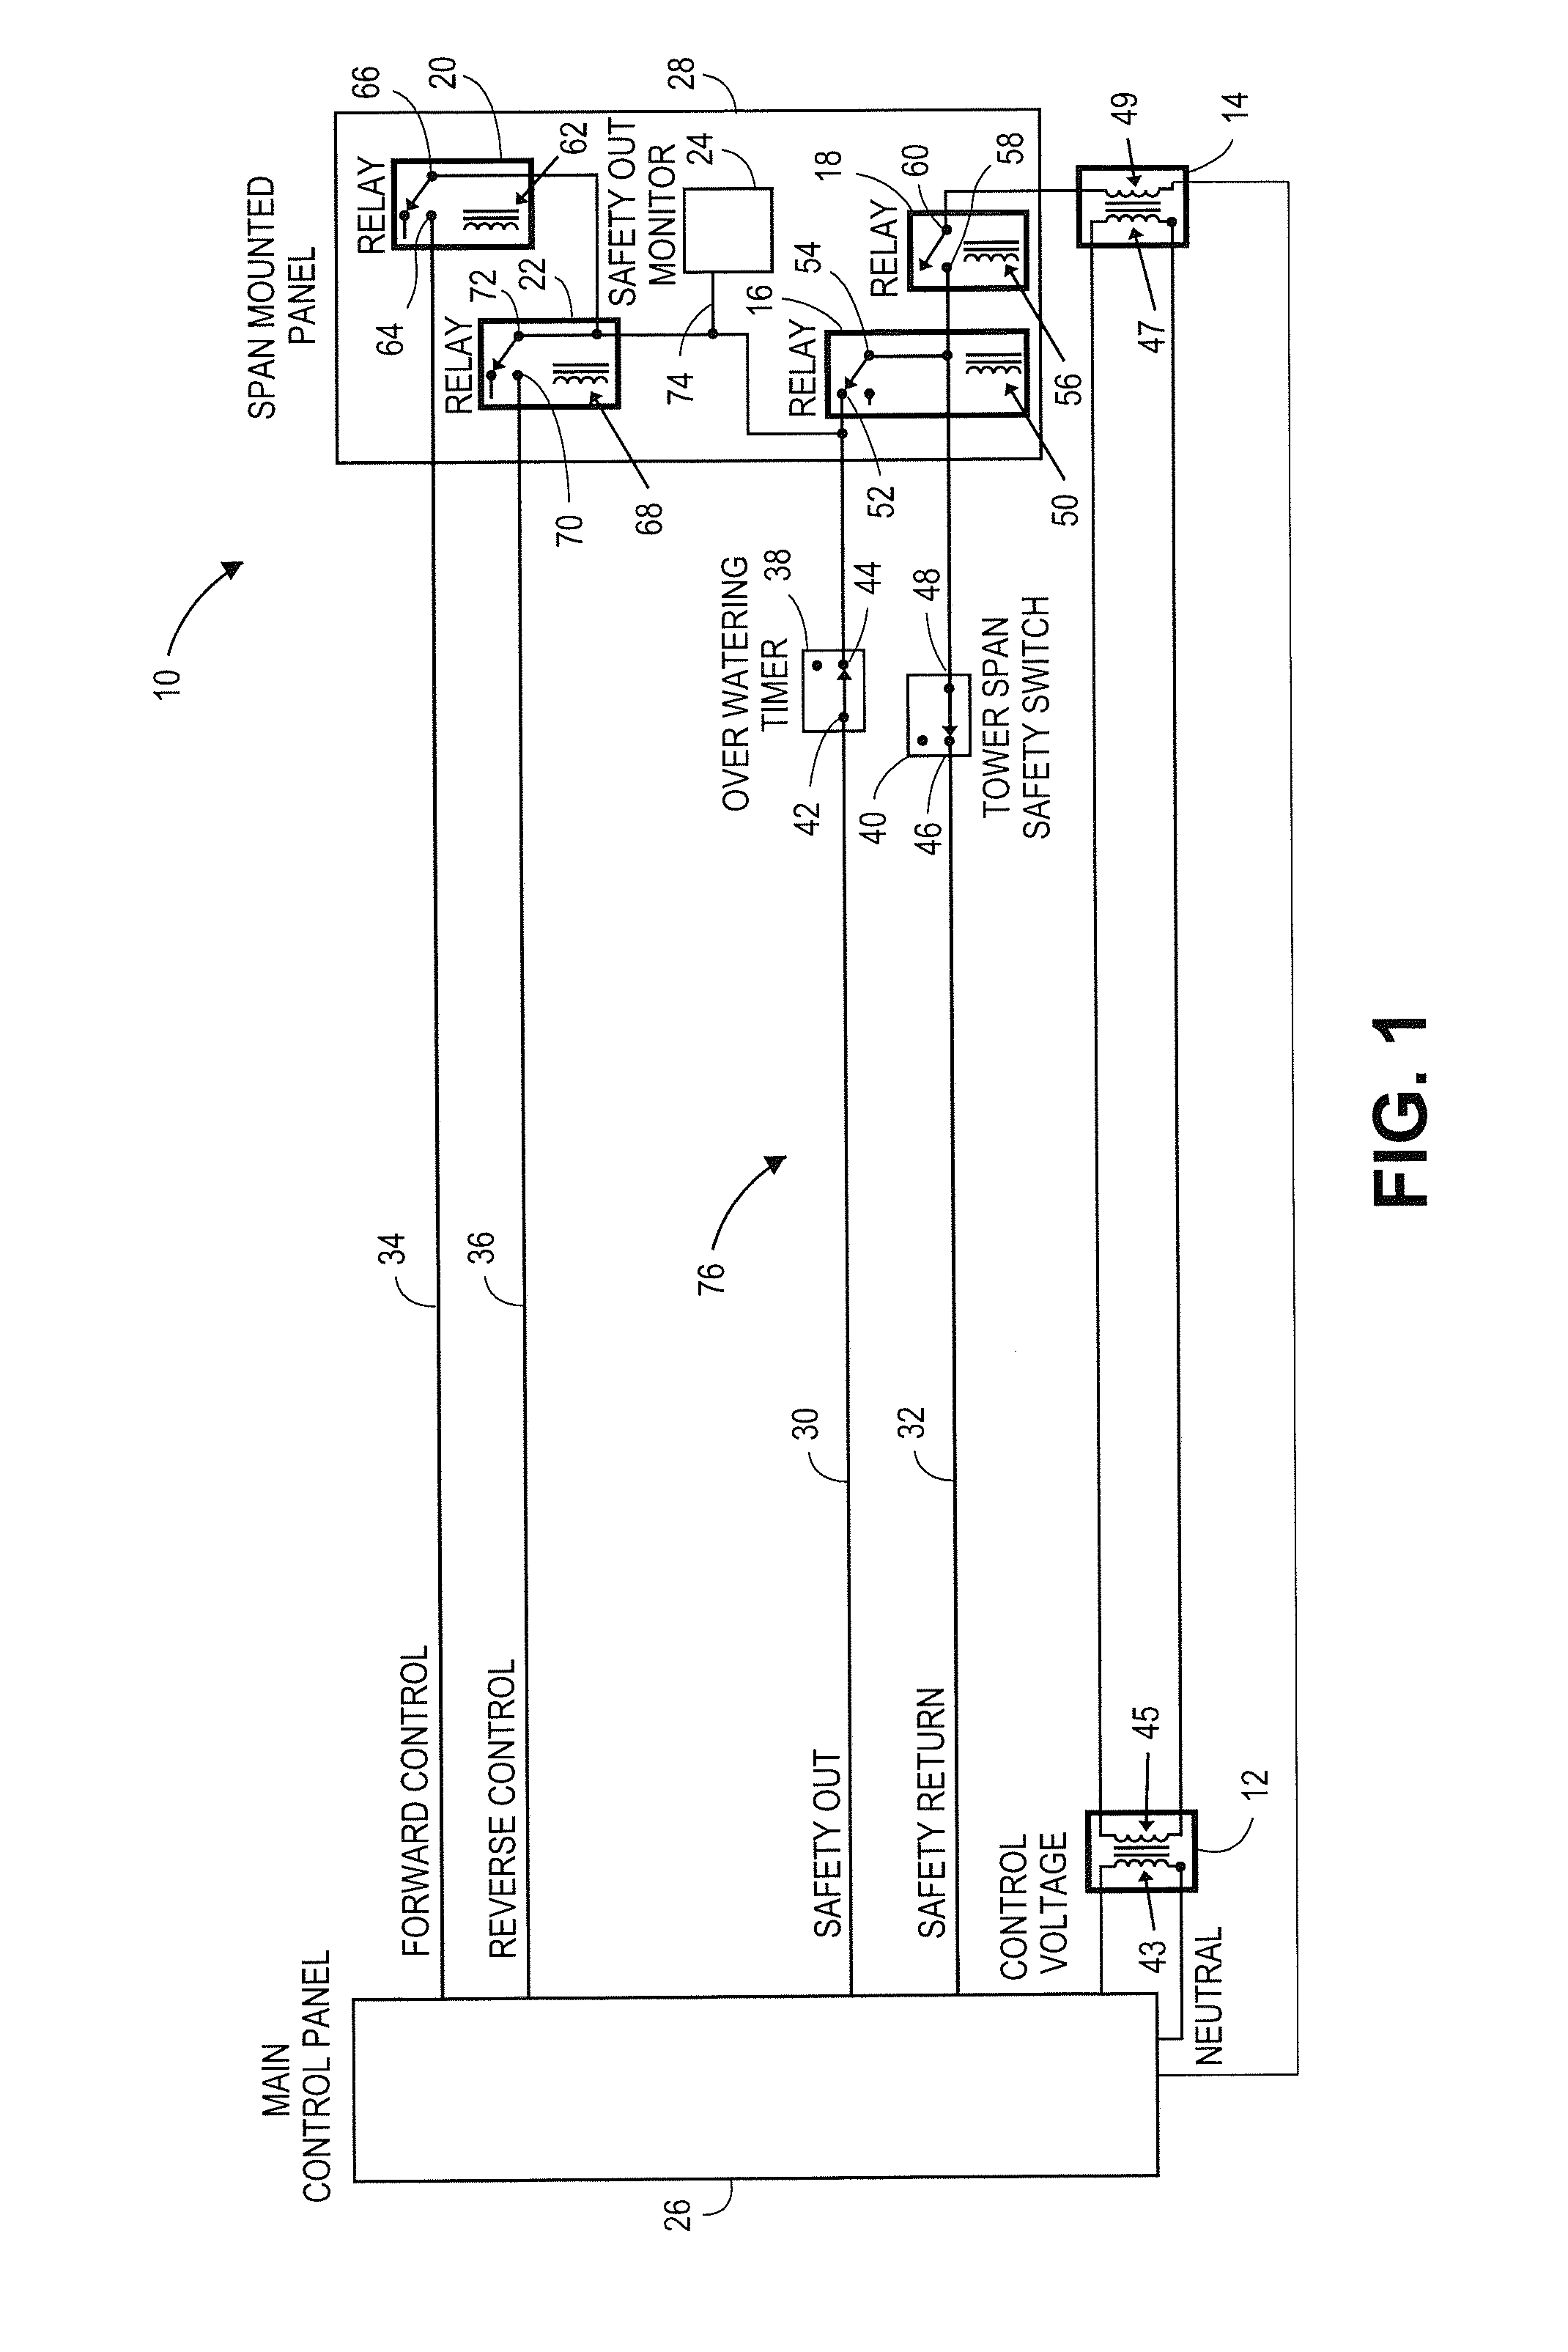 Low-power start-up and direction control circuitry for an irrigation system